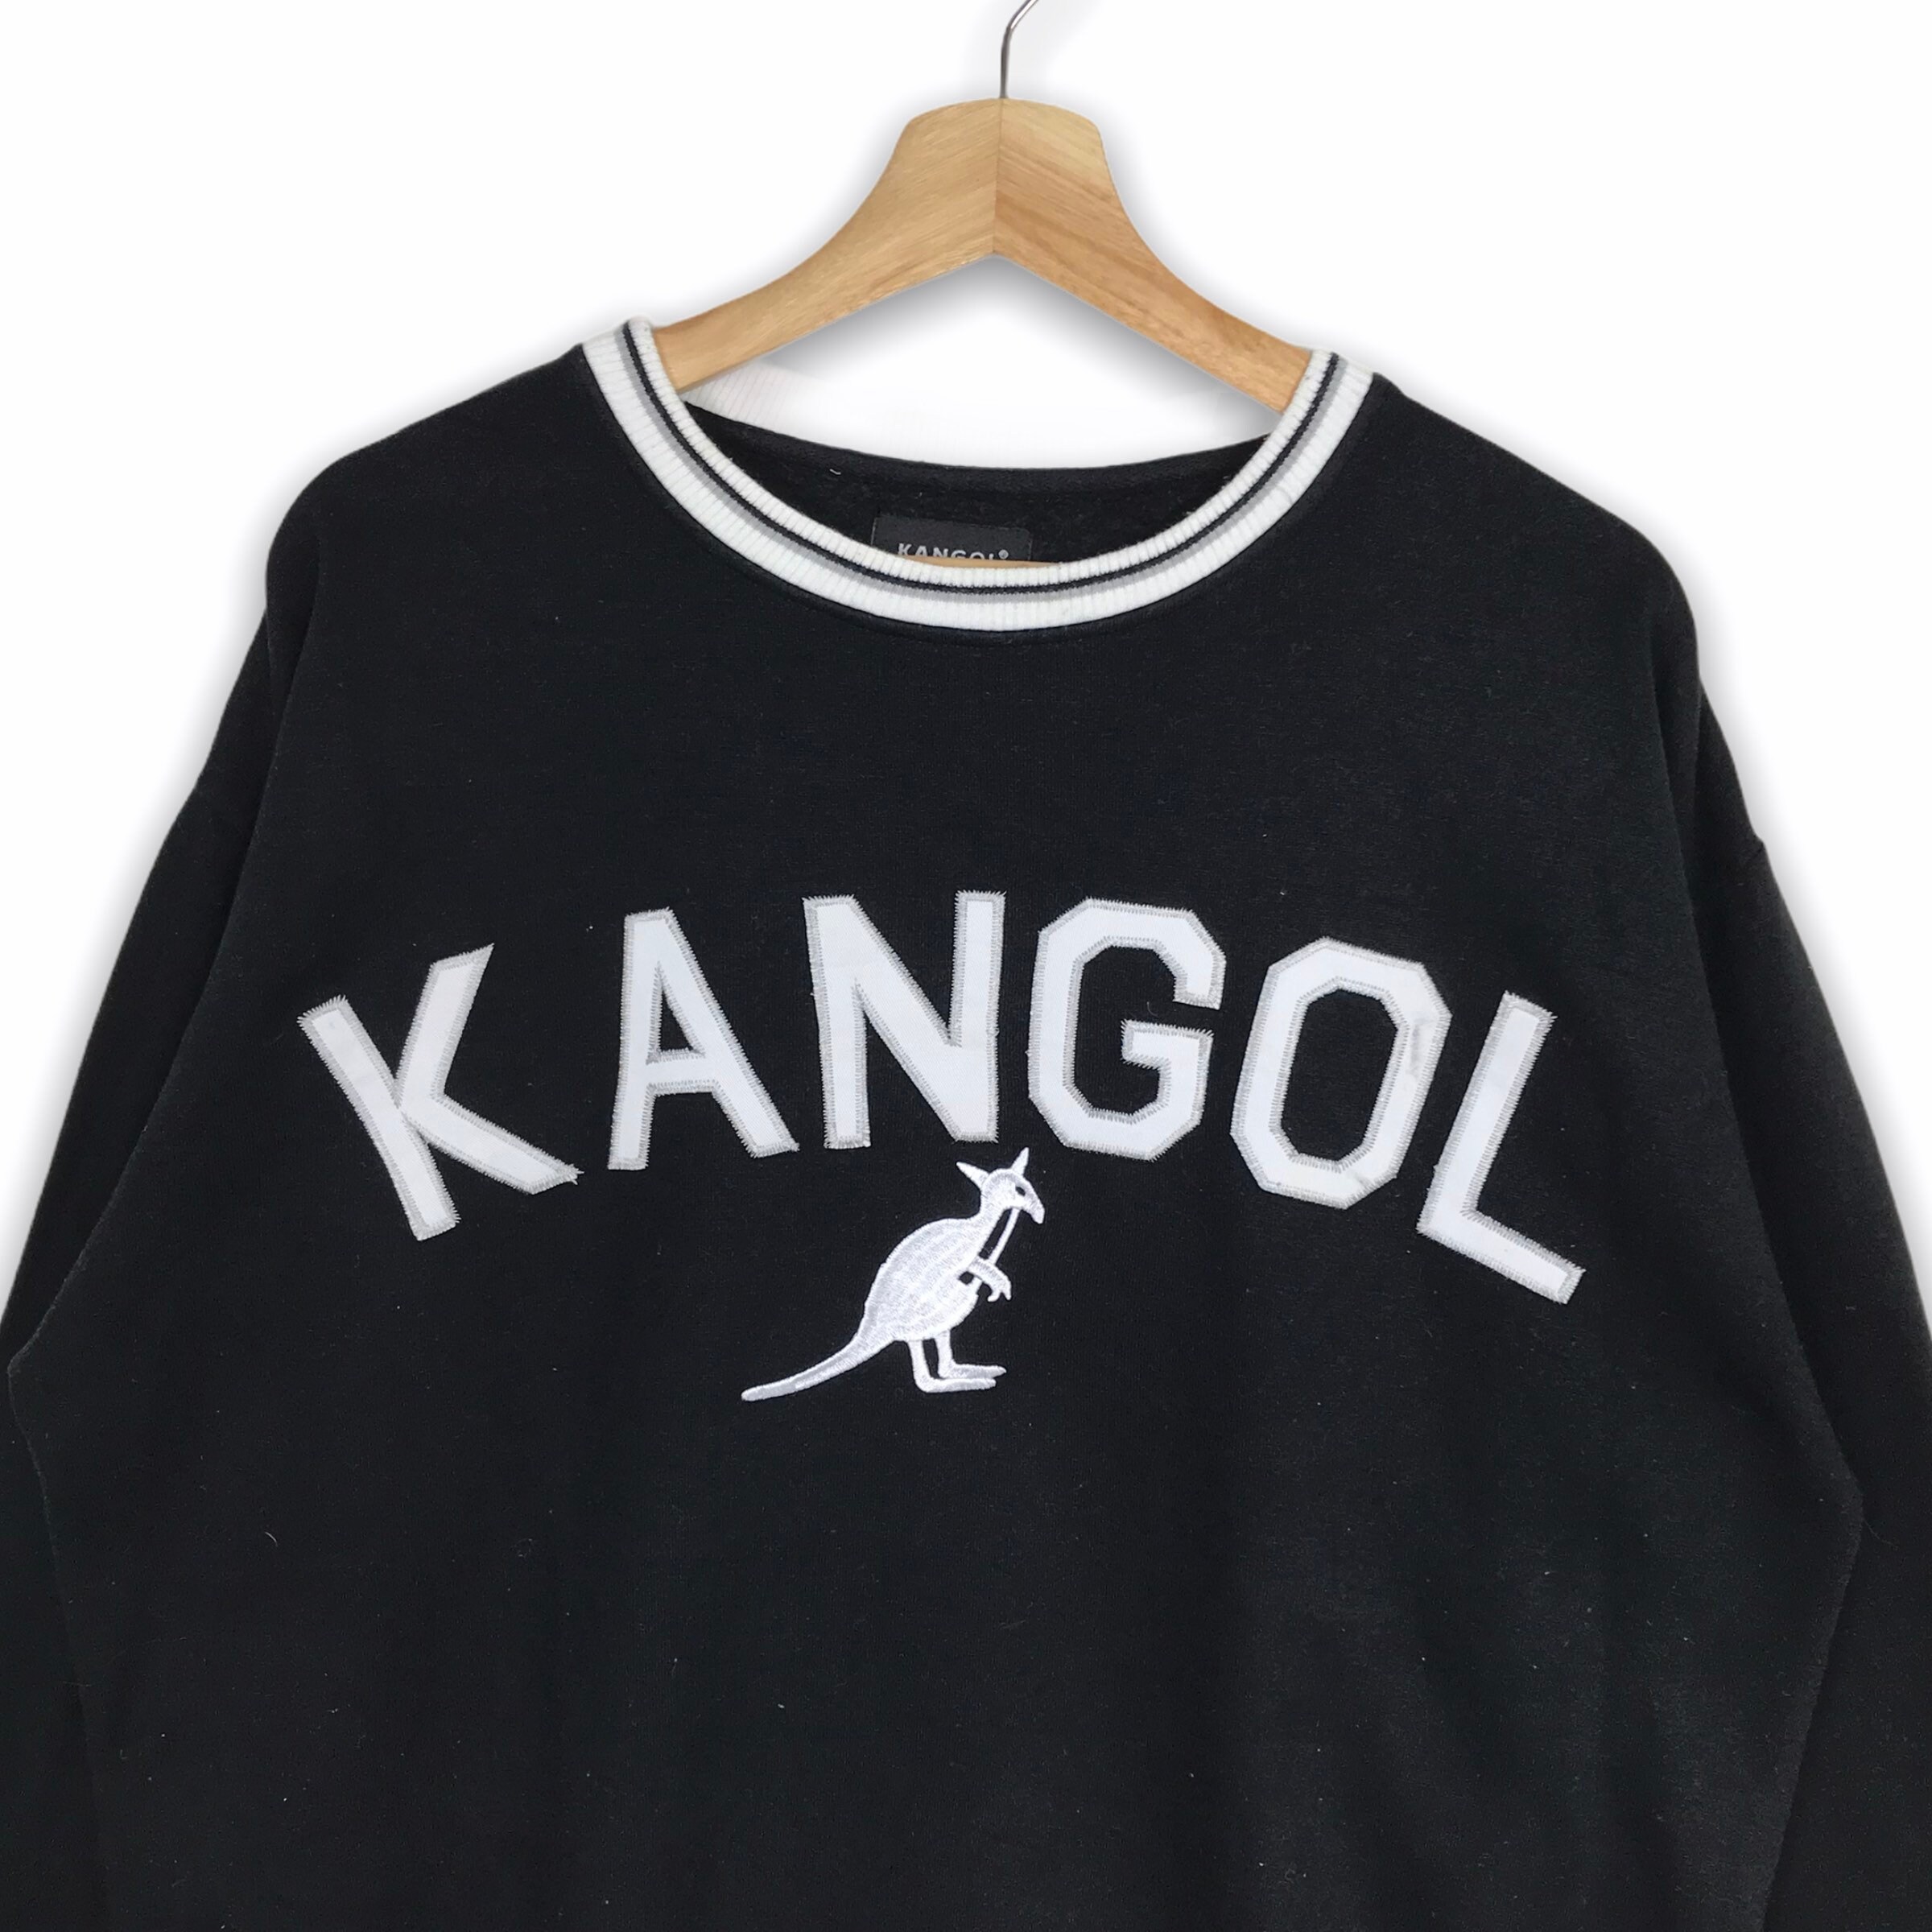 Vintage 90s KANGOL SPORTSWEAR Embroidery Spell Out Big Logo | Etsy